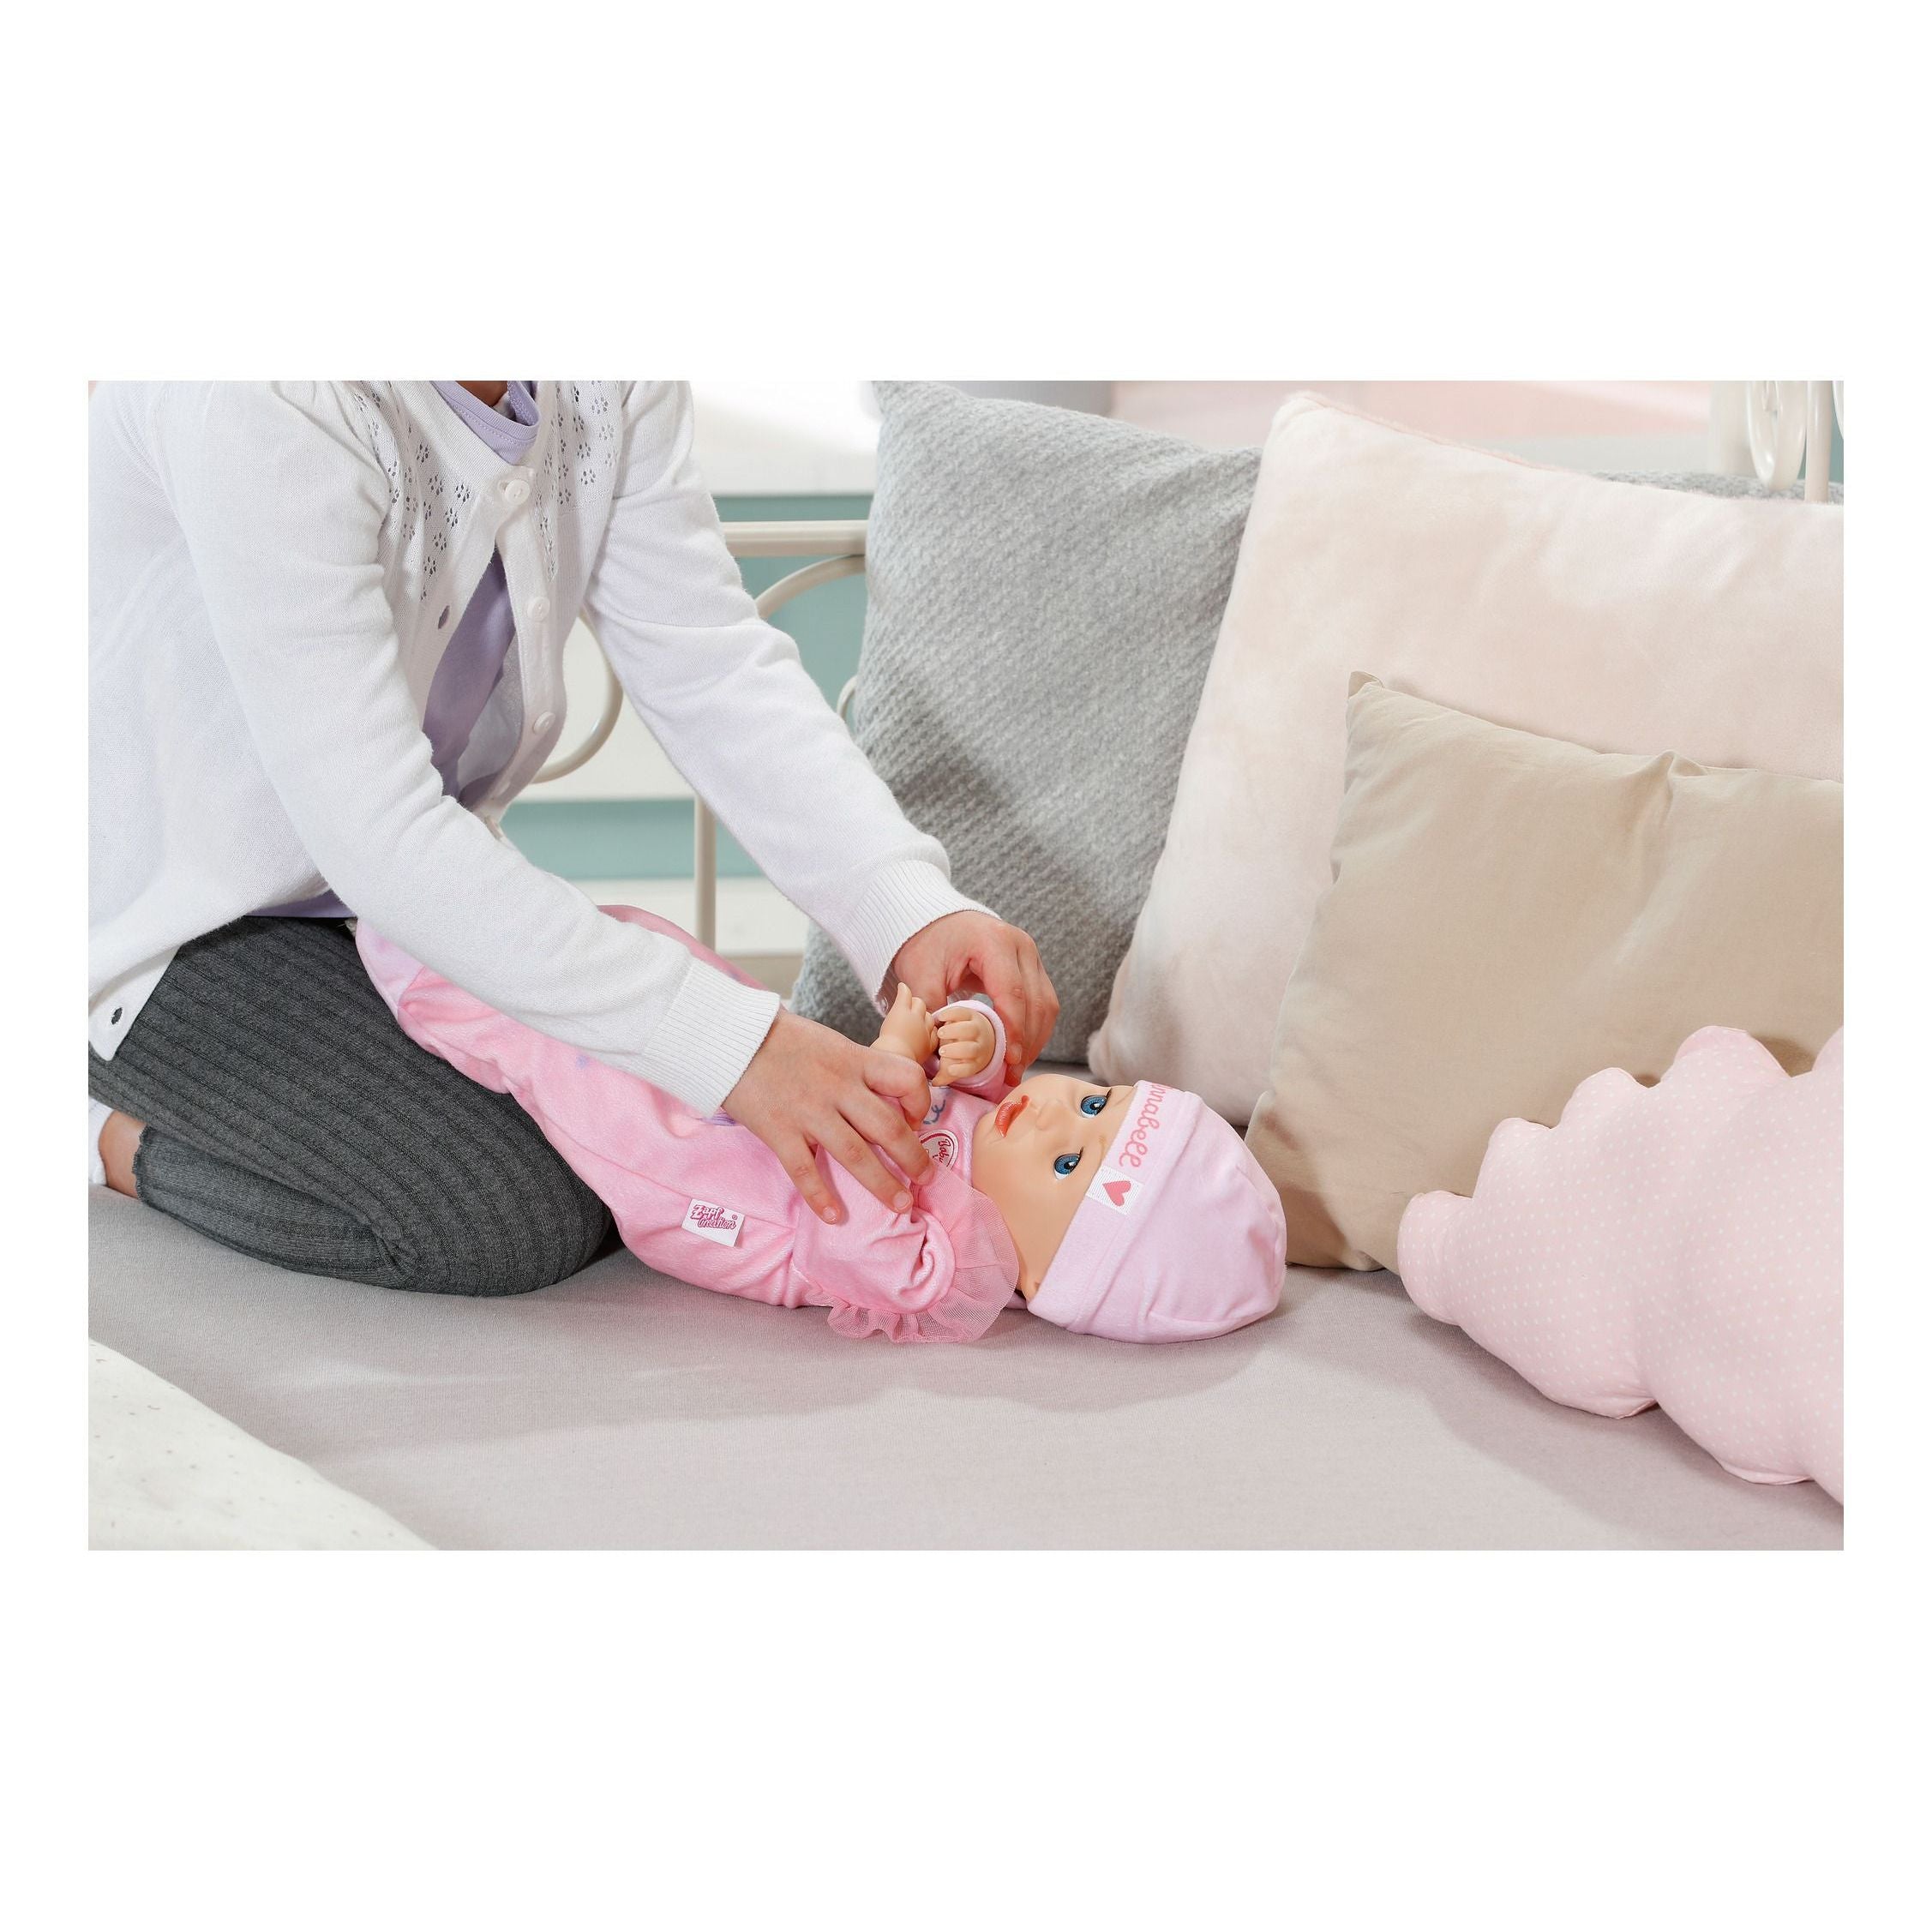 Baby Annabell Interactive Annabell 43cm Baby Annabell